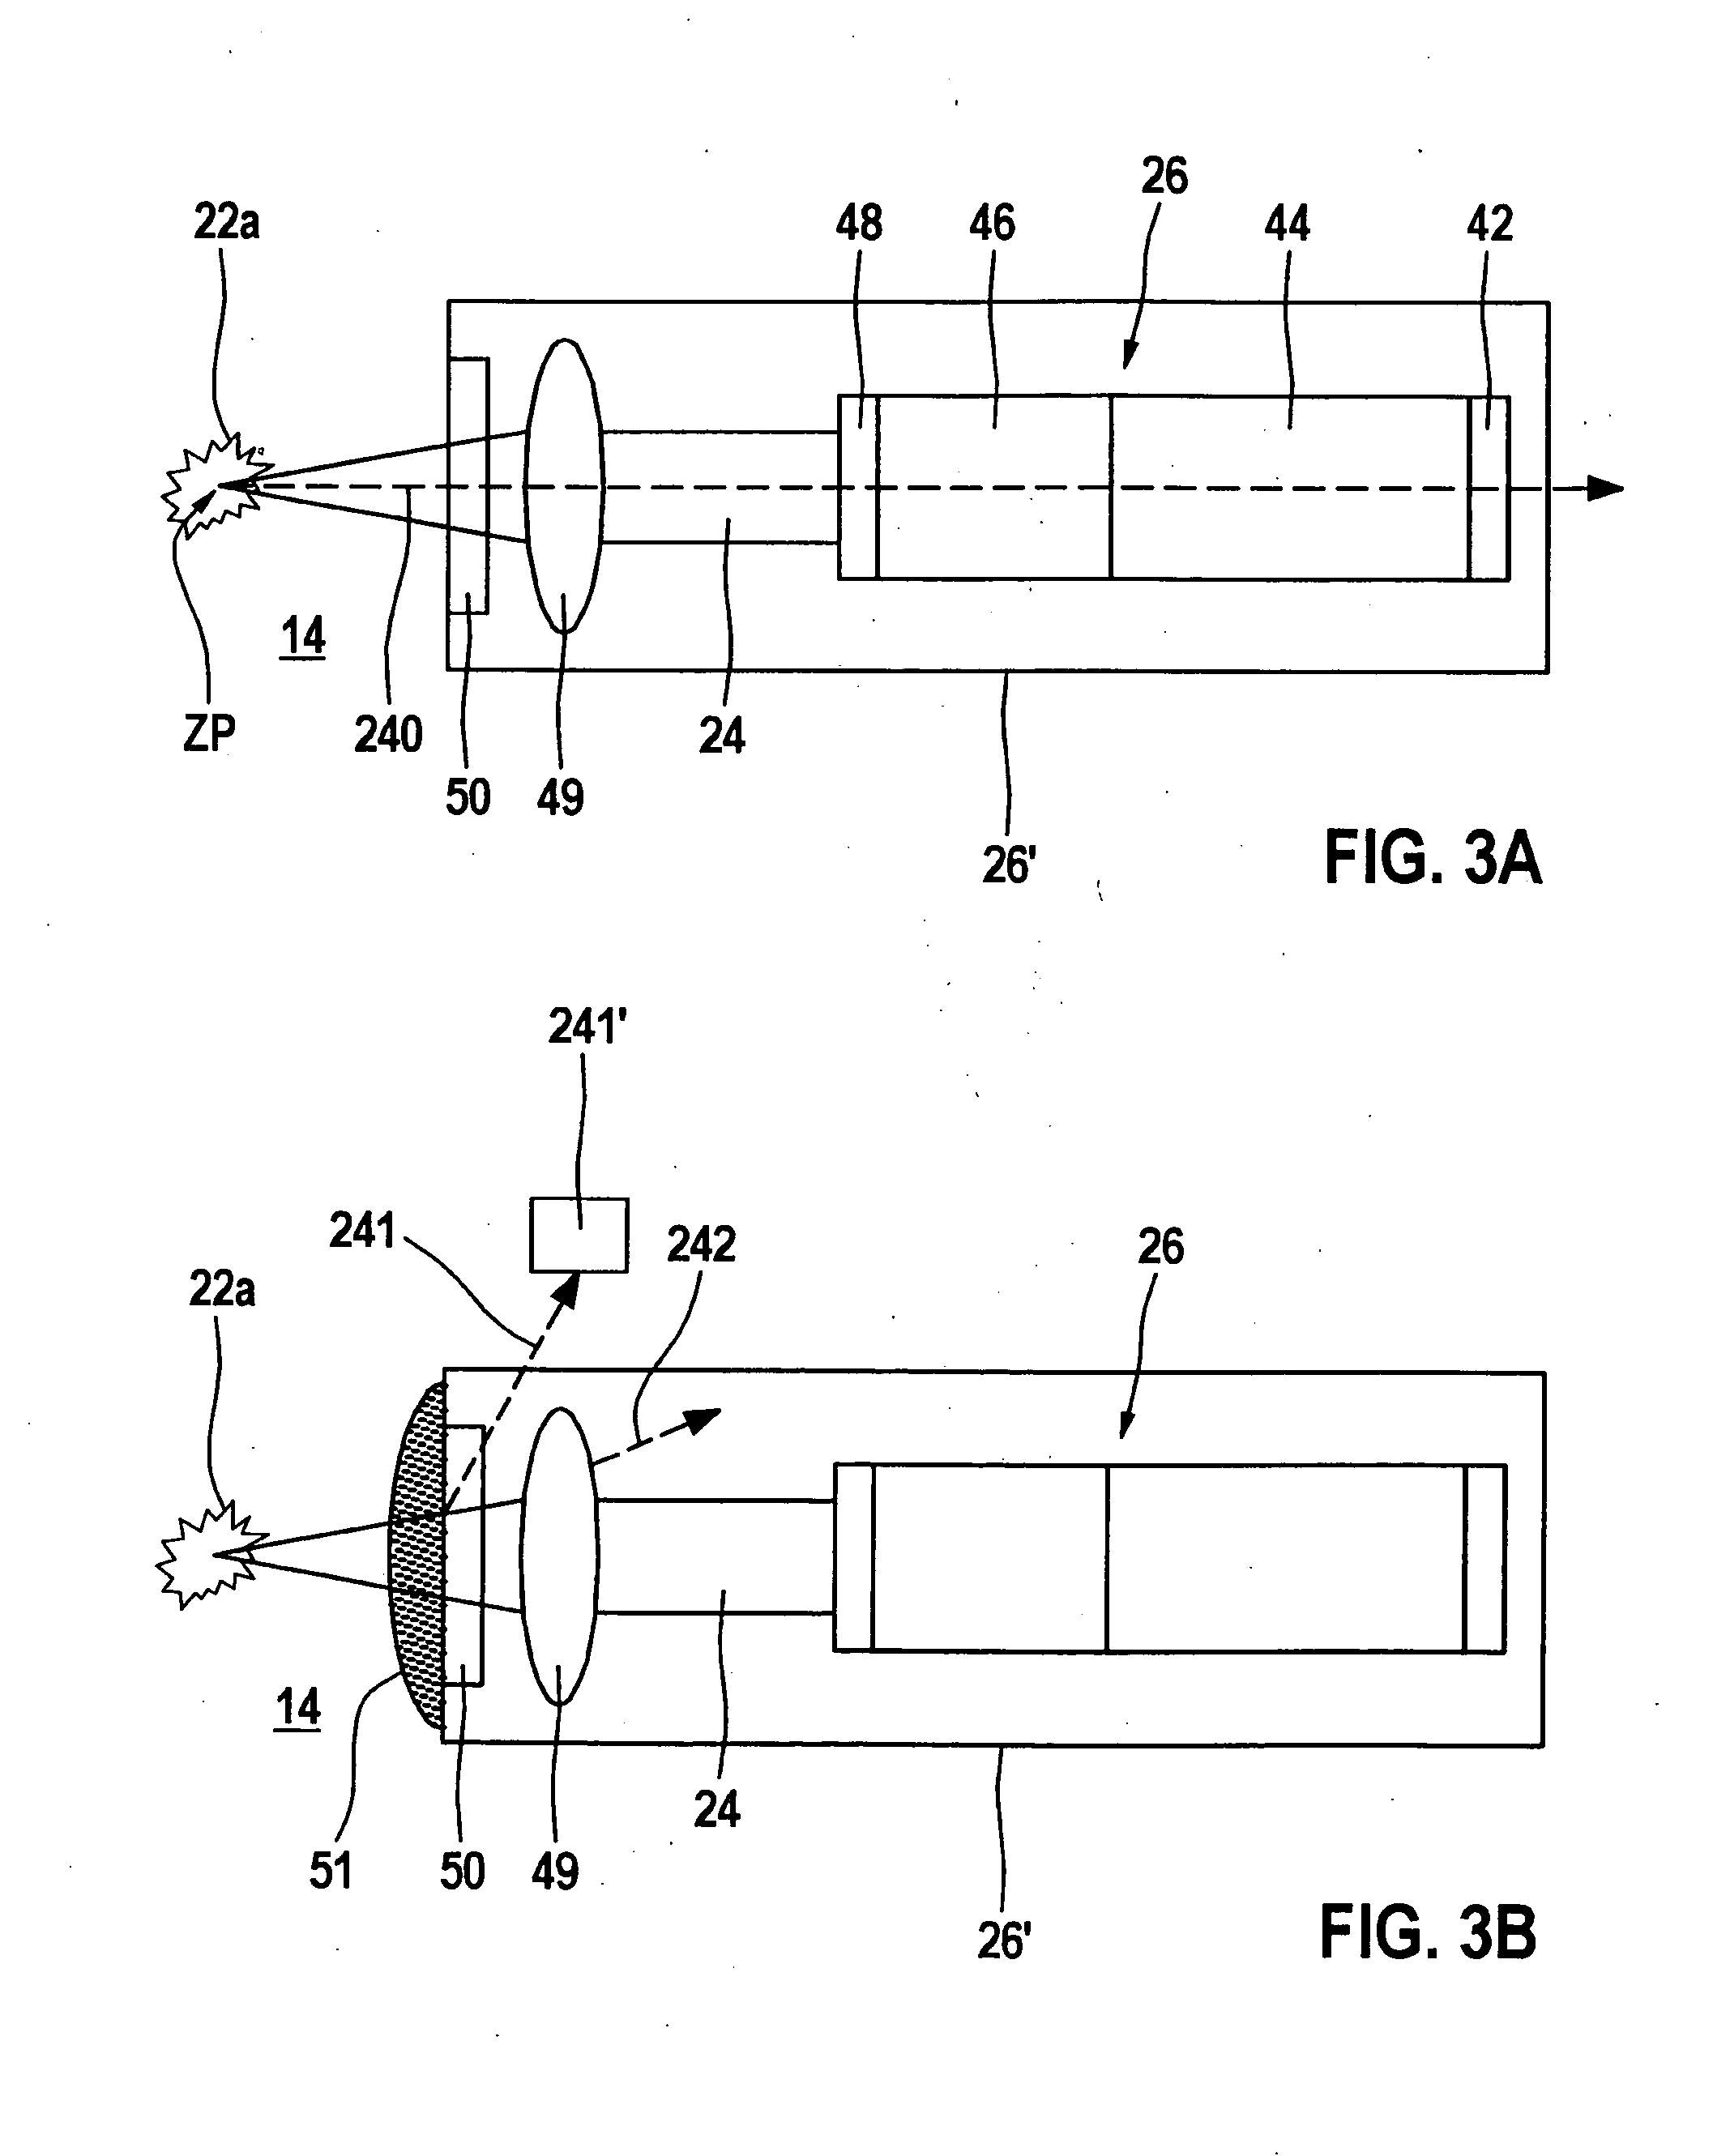 Method for operating an ignition device